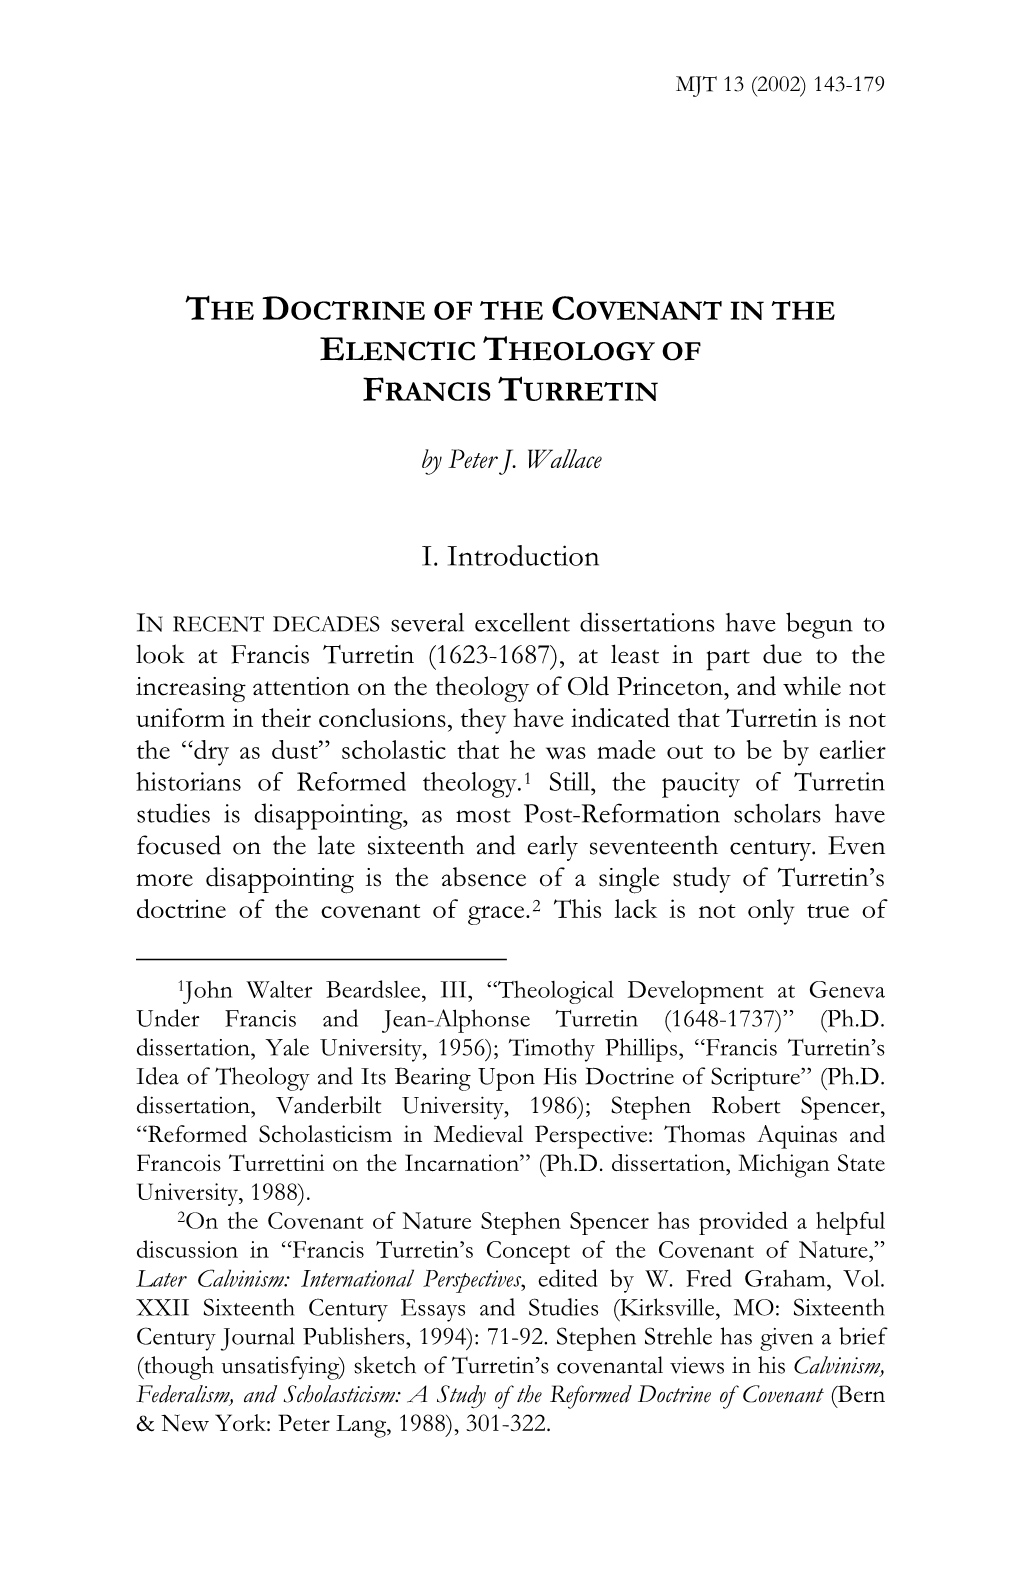 The Doctrine of the Covenant in the Elenctic Theology of Francis Turretin